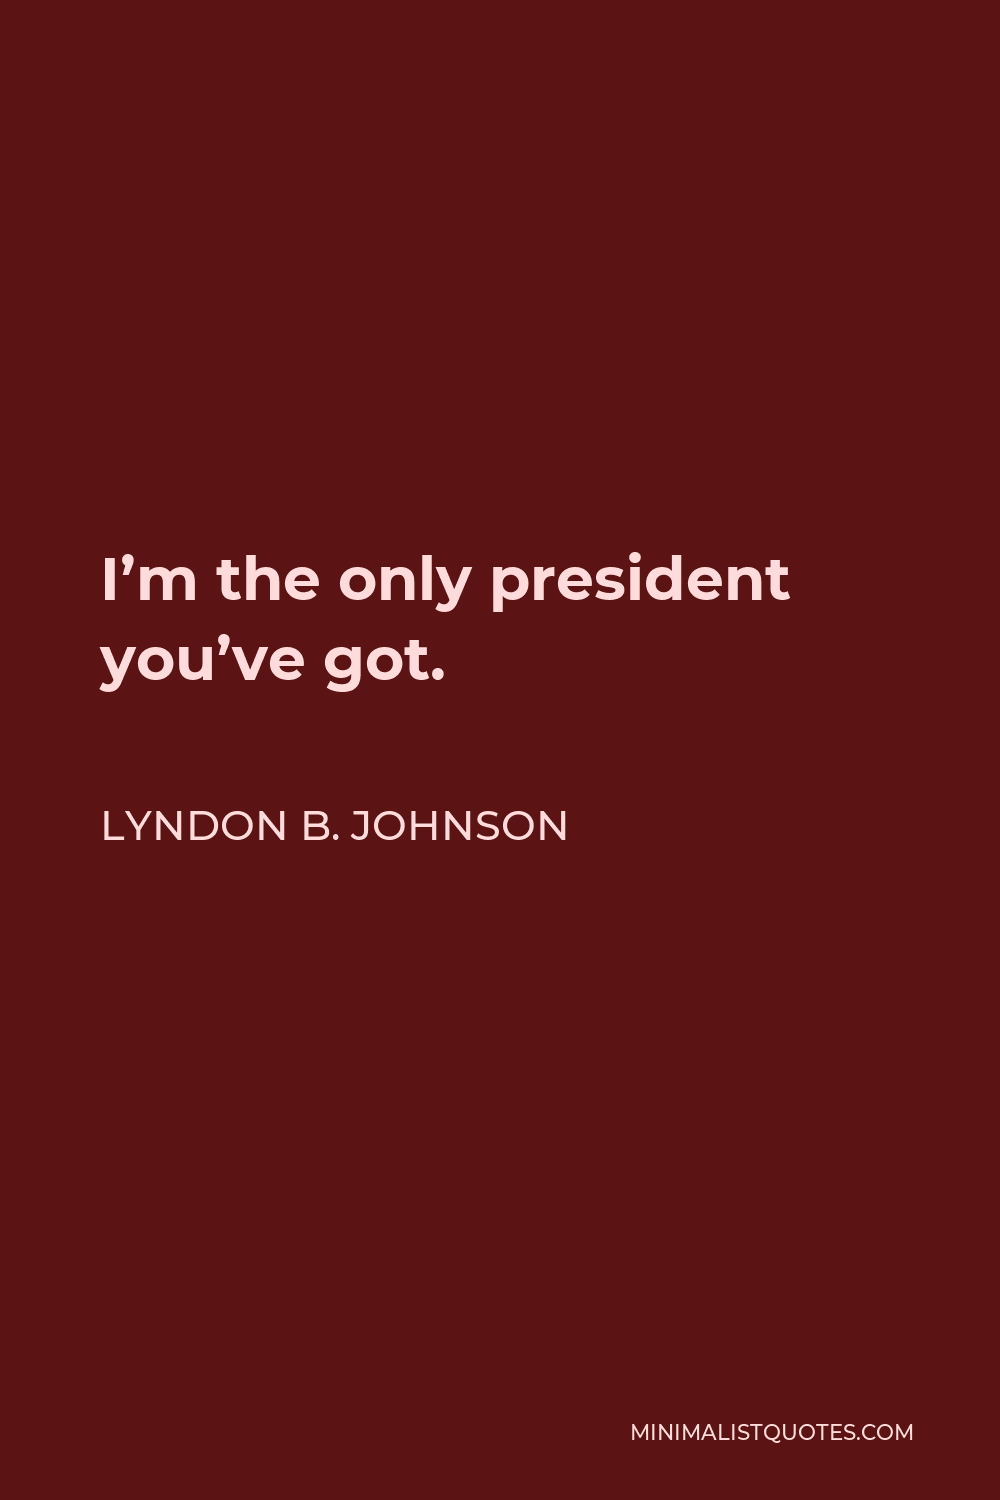 Lyndon B. Johnson Quote - I’m the only president you’ve got.